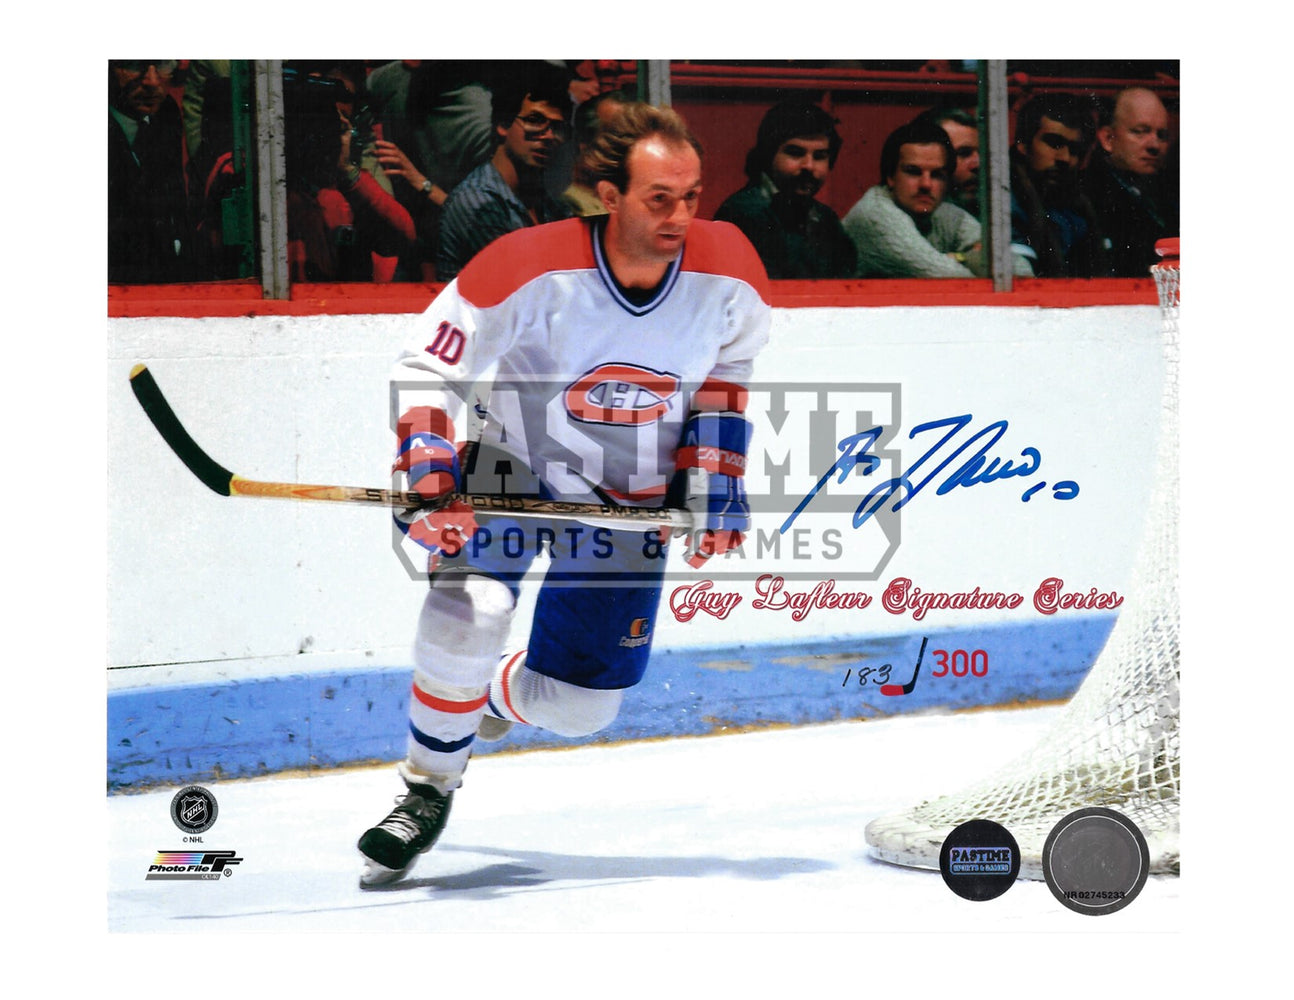 Guy Lafleur Autographed 8X10 Montreal Canadians Away Jersey (Signature Series # out of 300 Skating Behind Net) - Pastime Sports & Games